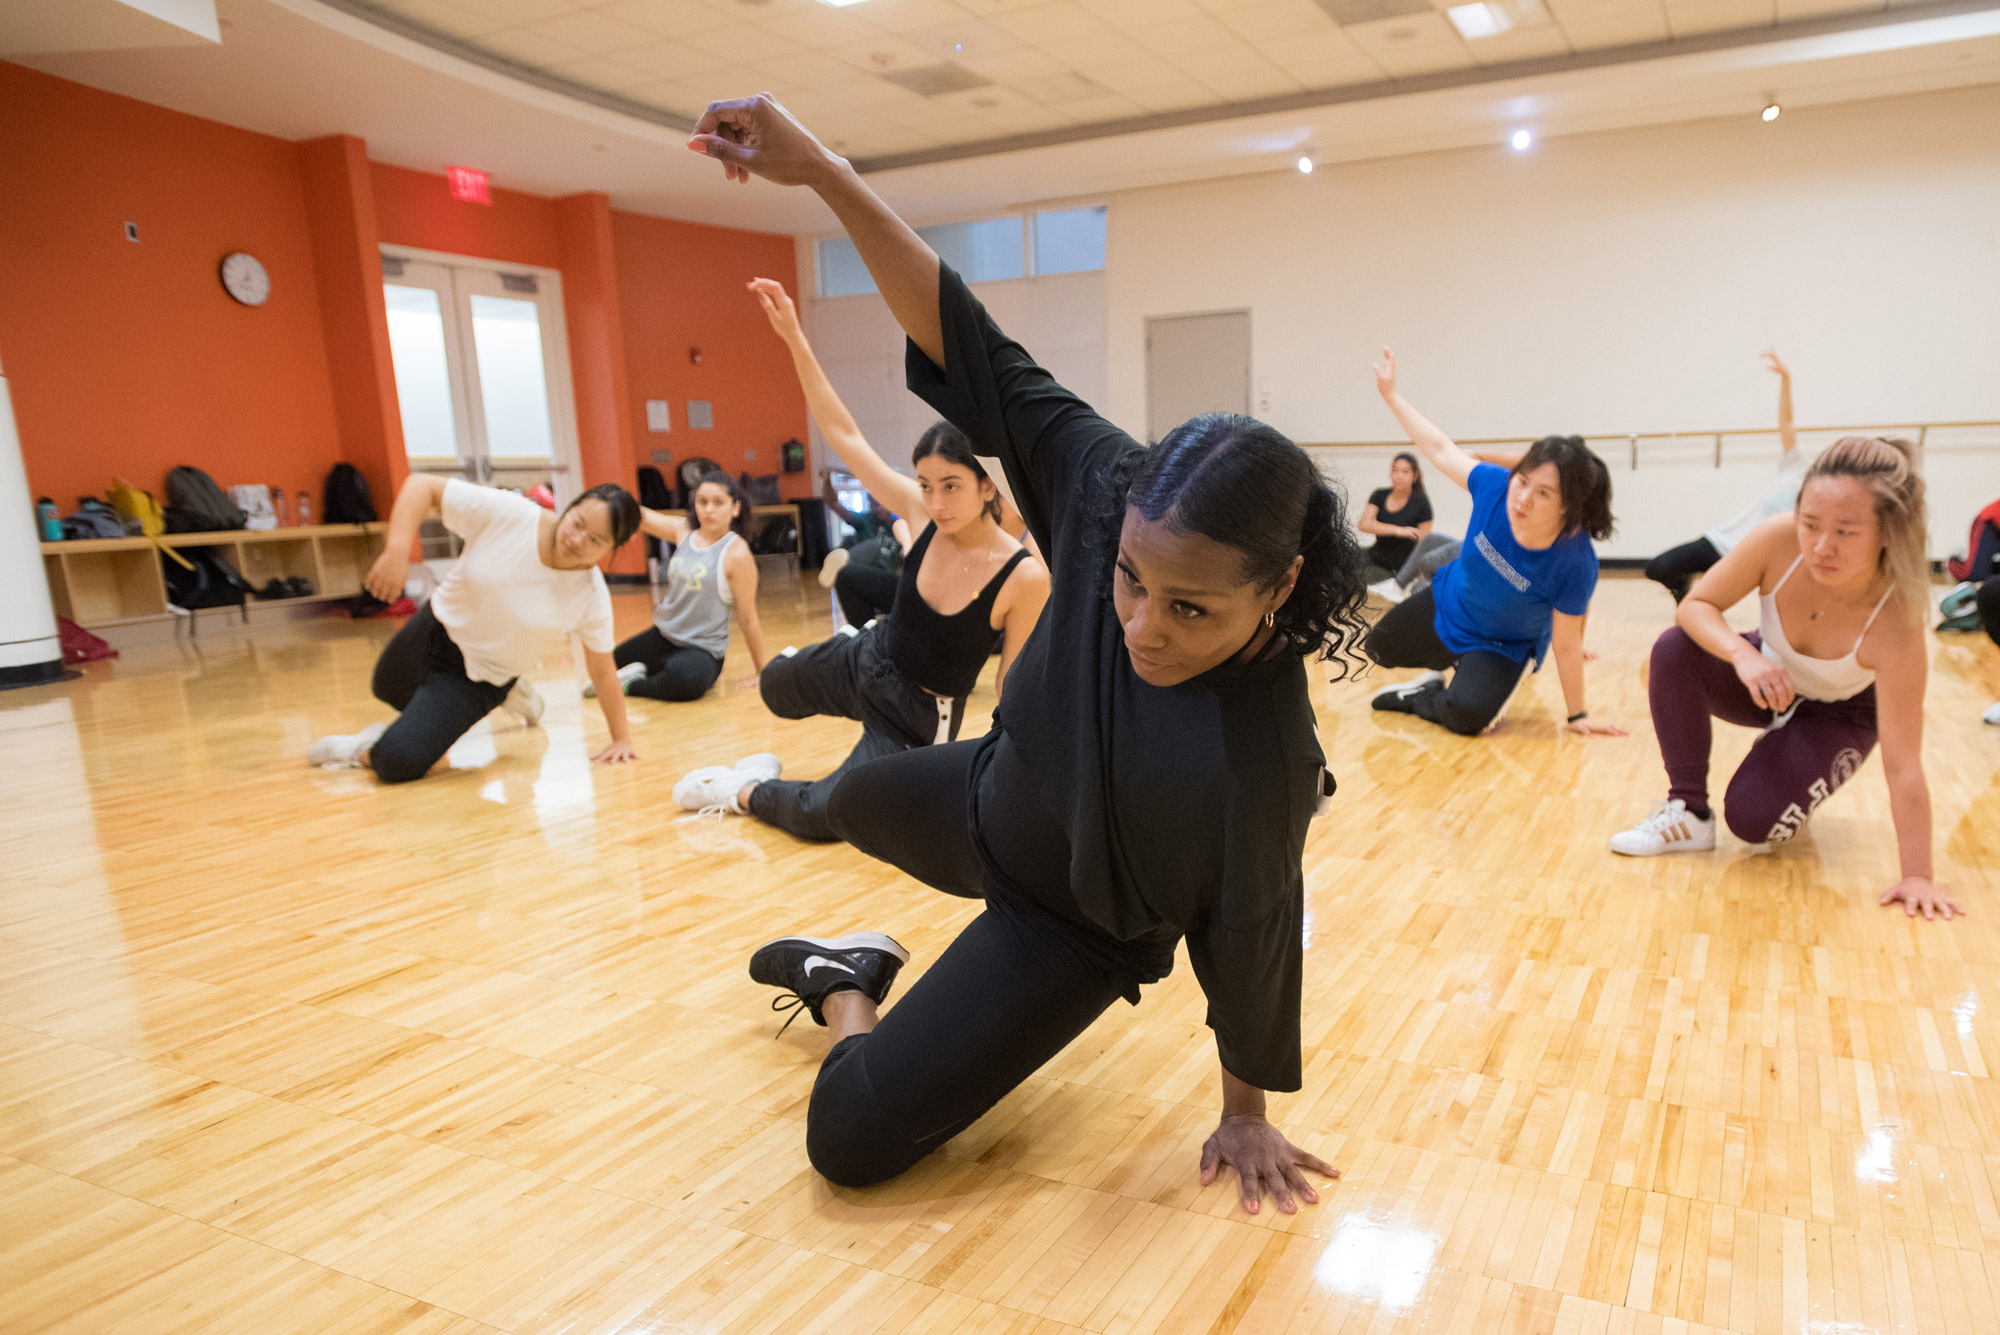 Dance Instructor Jossie Coleman: “Dance for Me Is Life, It's Everything” |  BU Today | Boston University